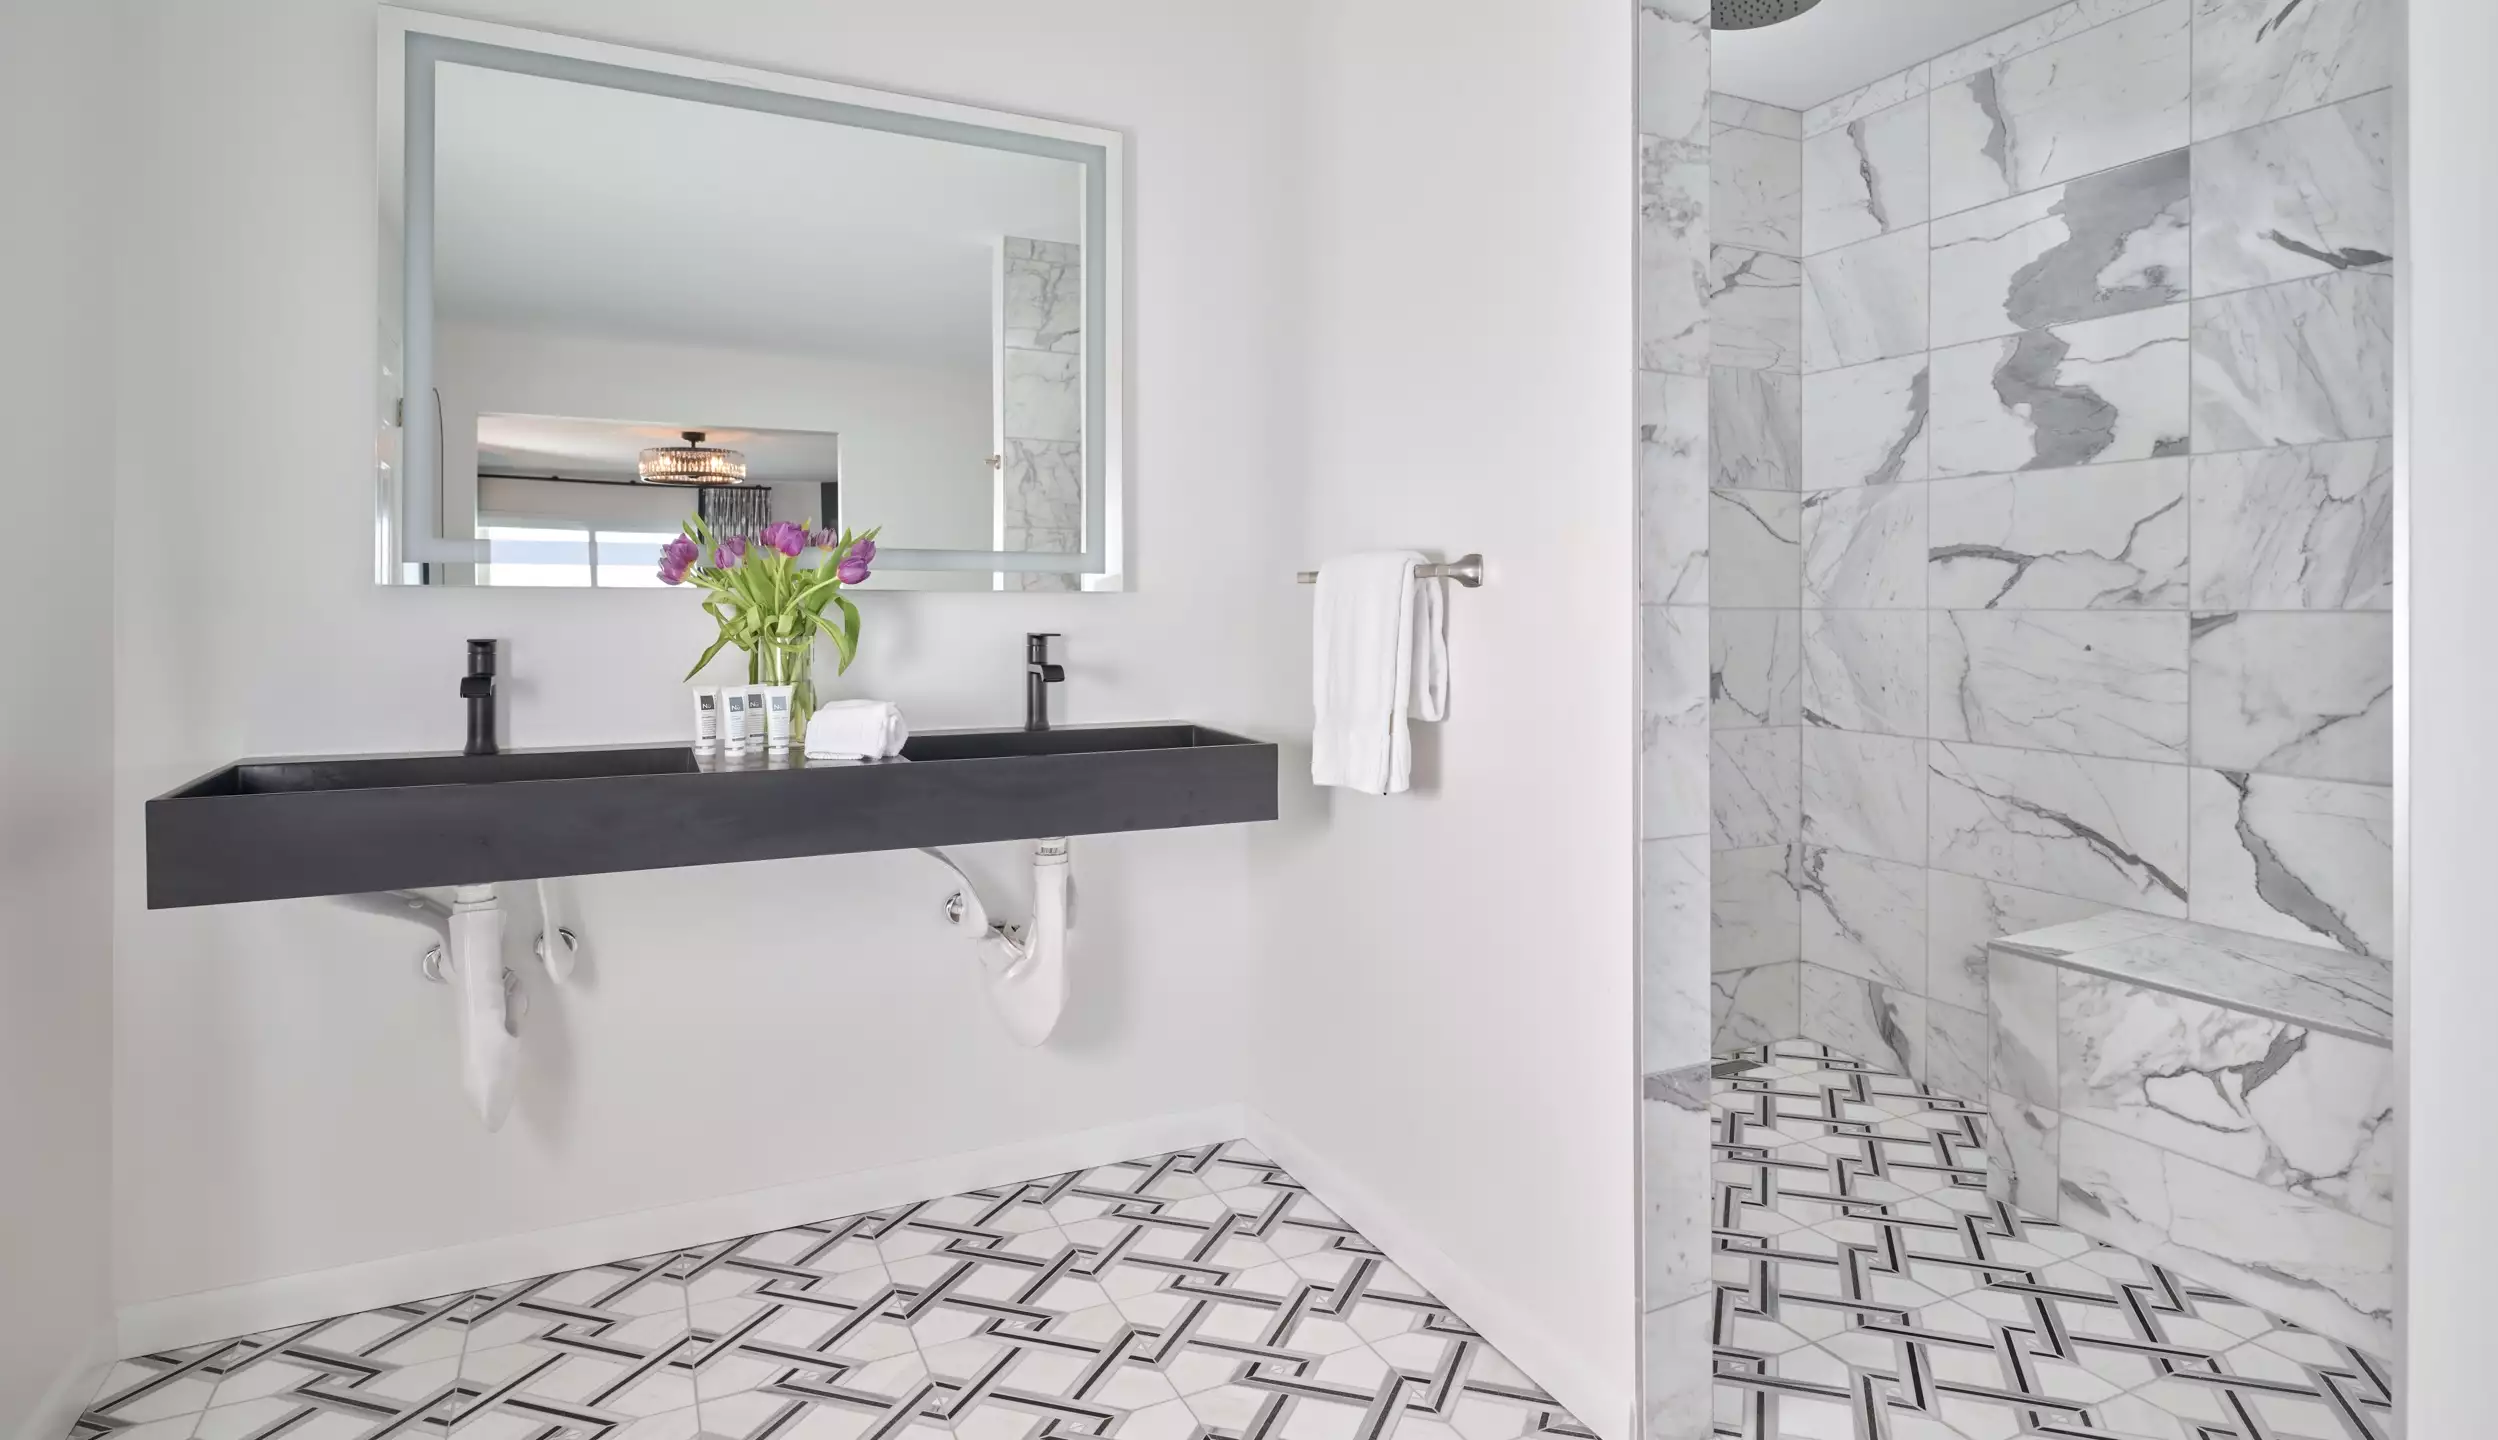 Barrier free marble shower and accessible sink